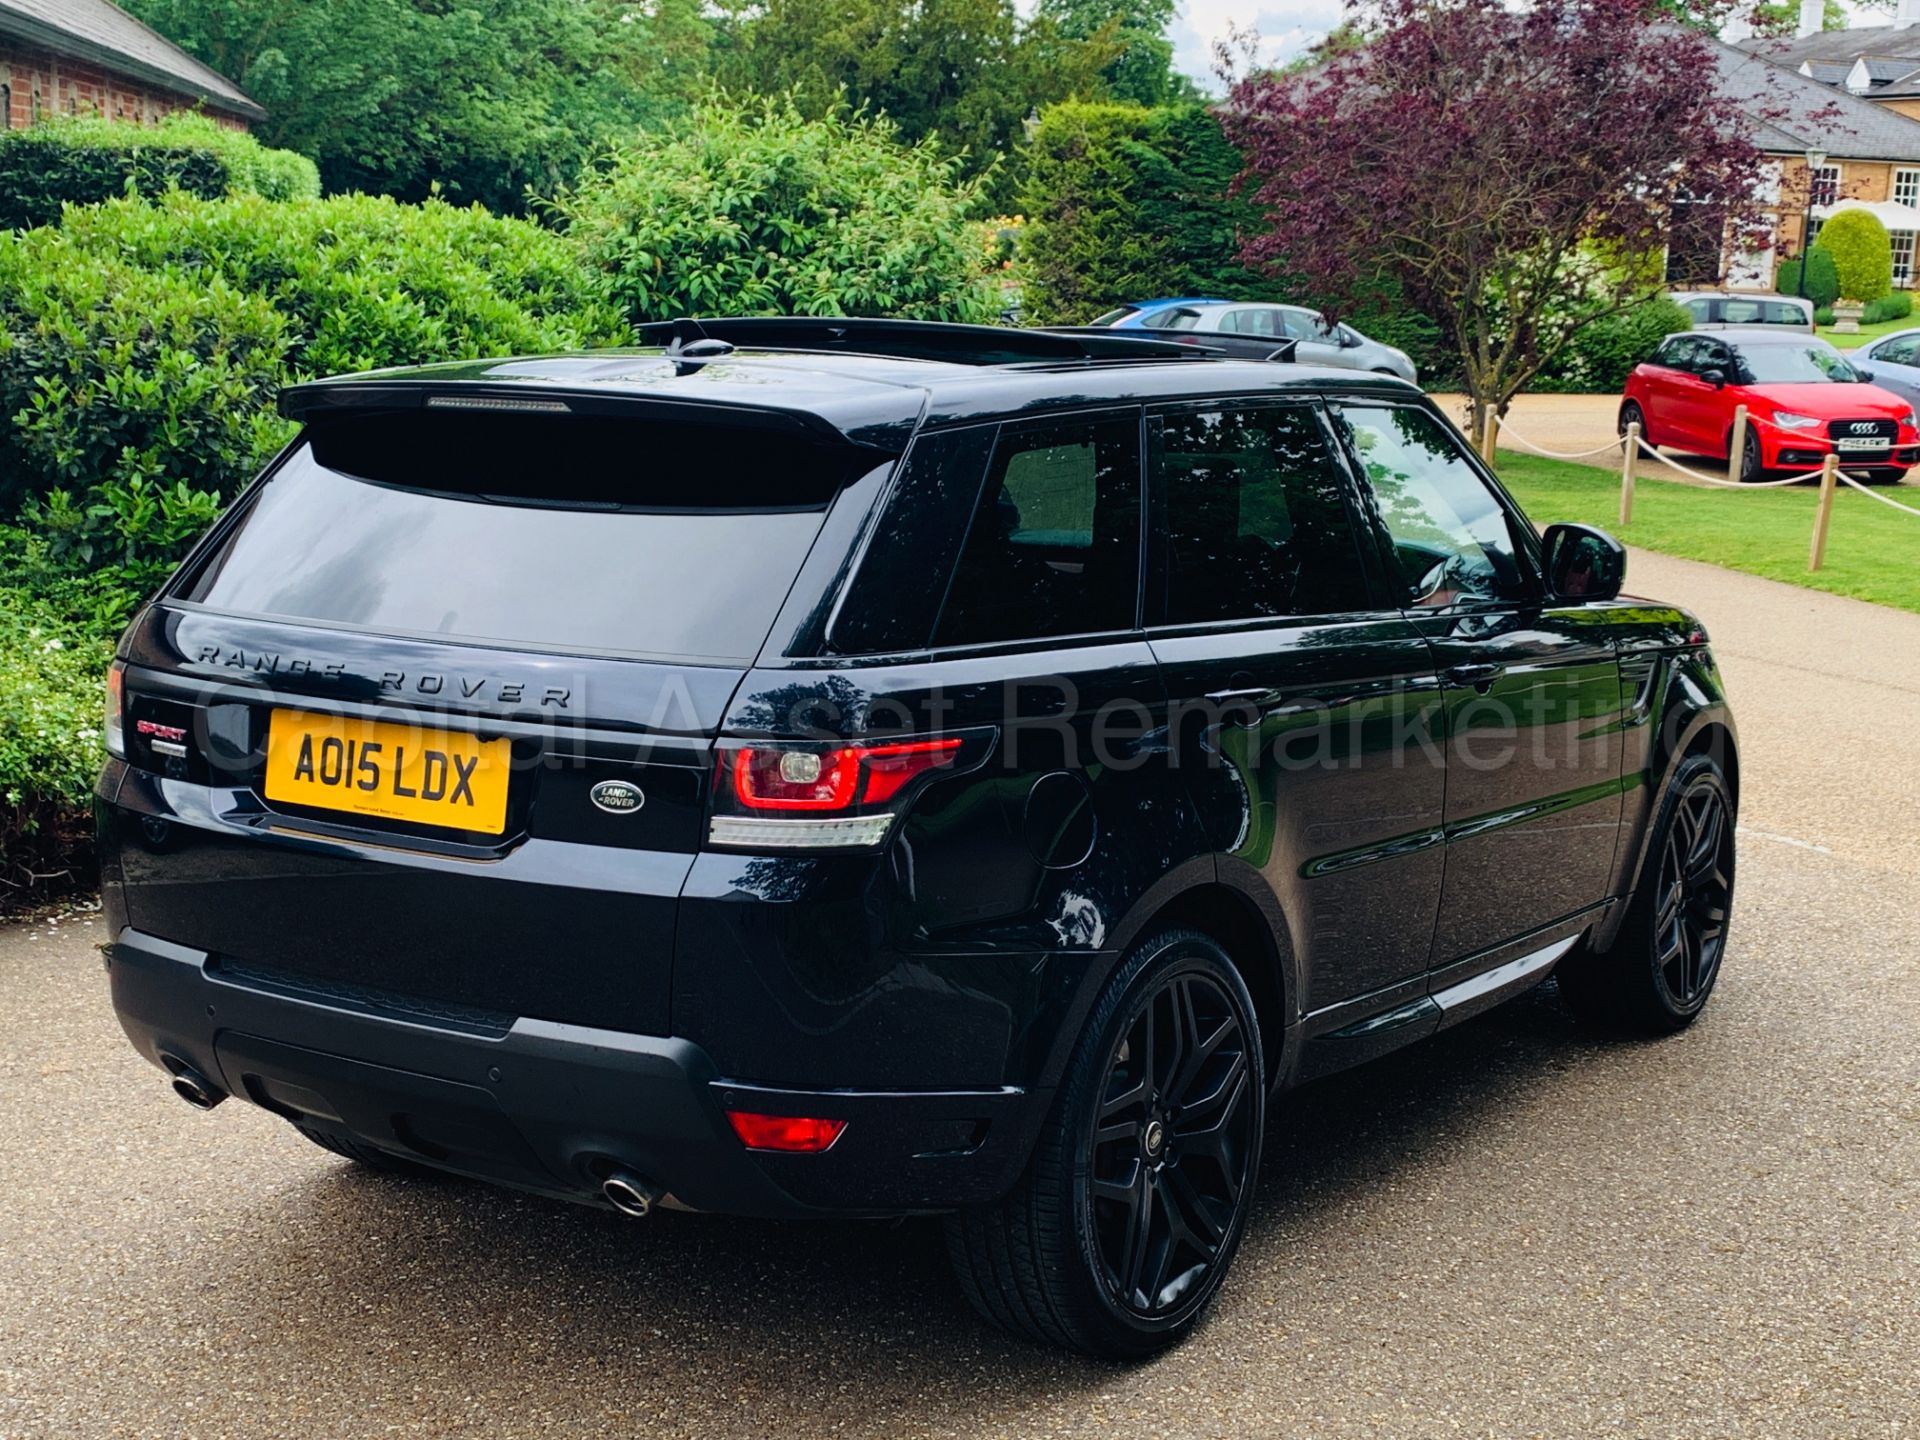 (On Sale) RANGE ROVER SPORT *AUTOBIOGRAPHY DYNAMIC* (2015) '4.4 SDV8 8 SPEED AUTO' **ULTIMATE SPEC** - Image 10 of 83